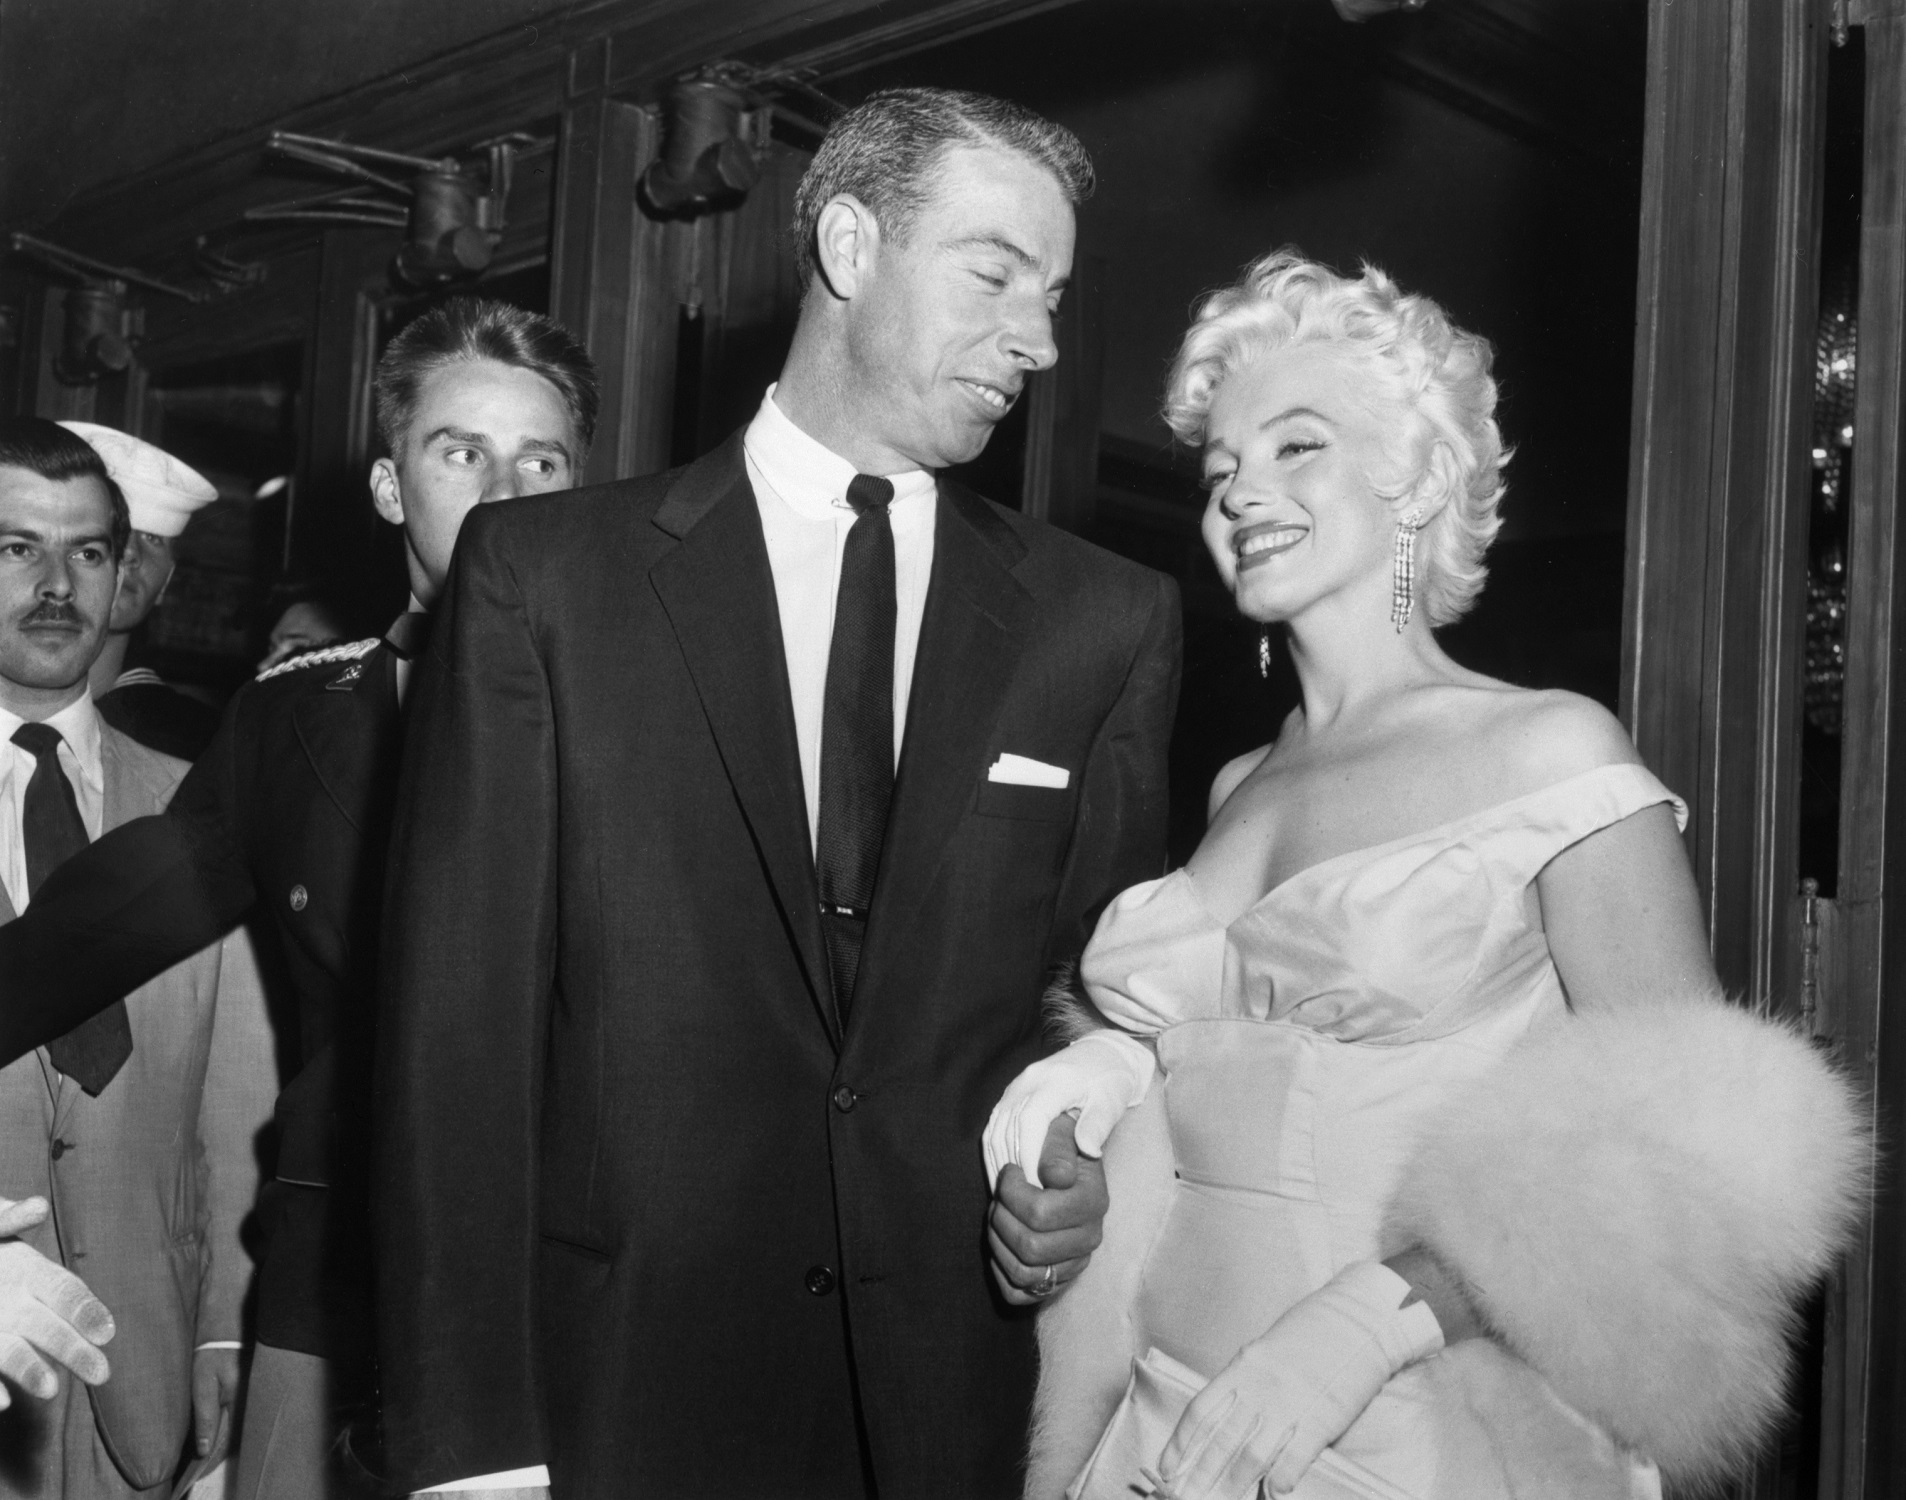 Joe DiMaggio and Marilyn Monroe atttend the premiere of 'The Seven Year Itch'